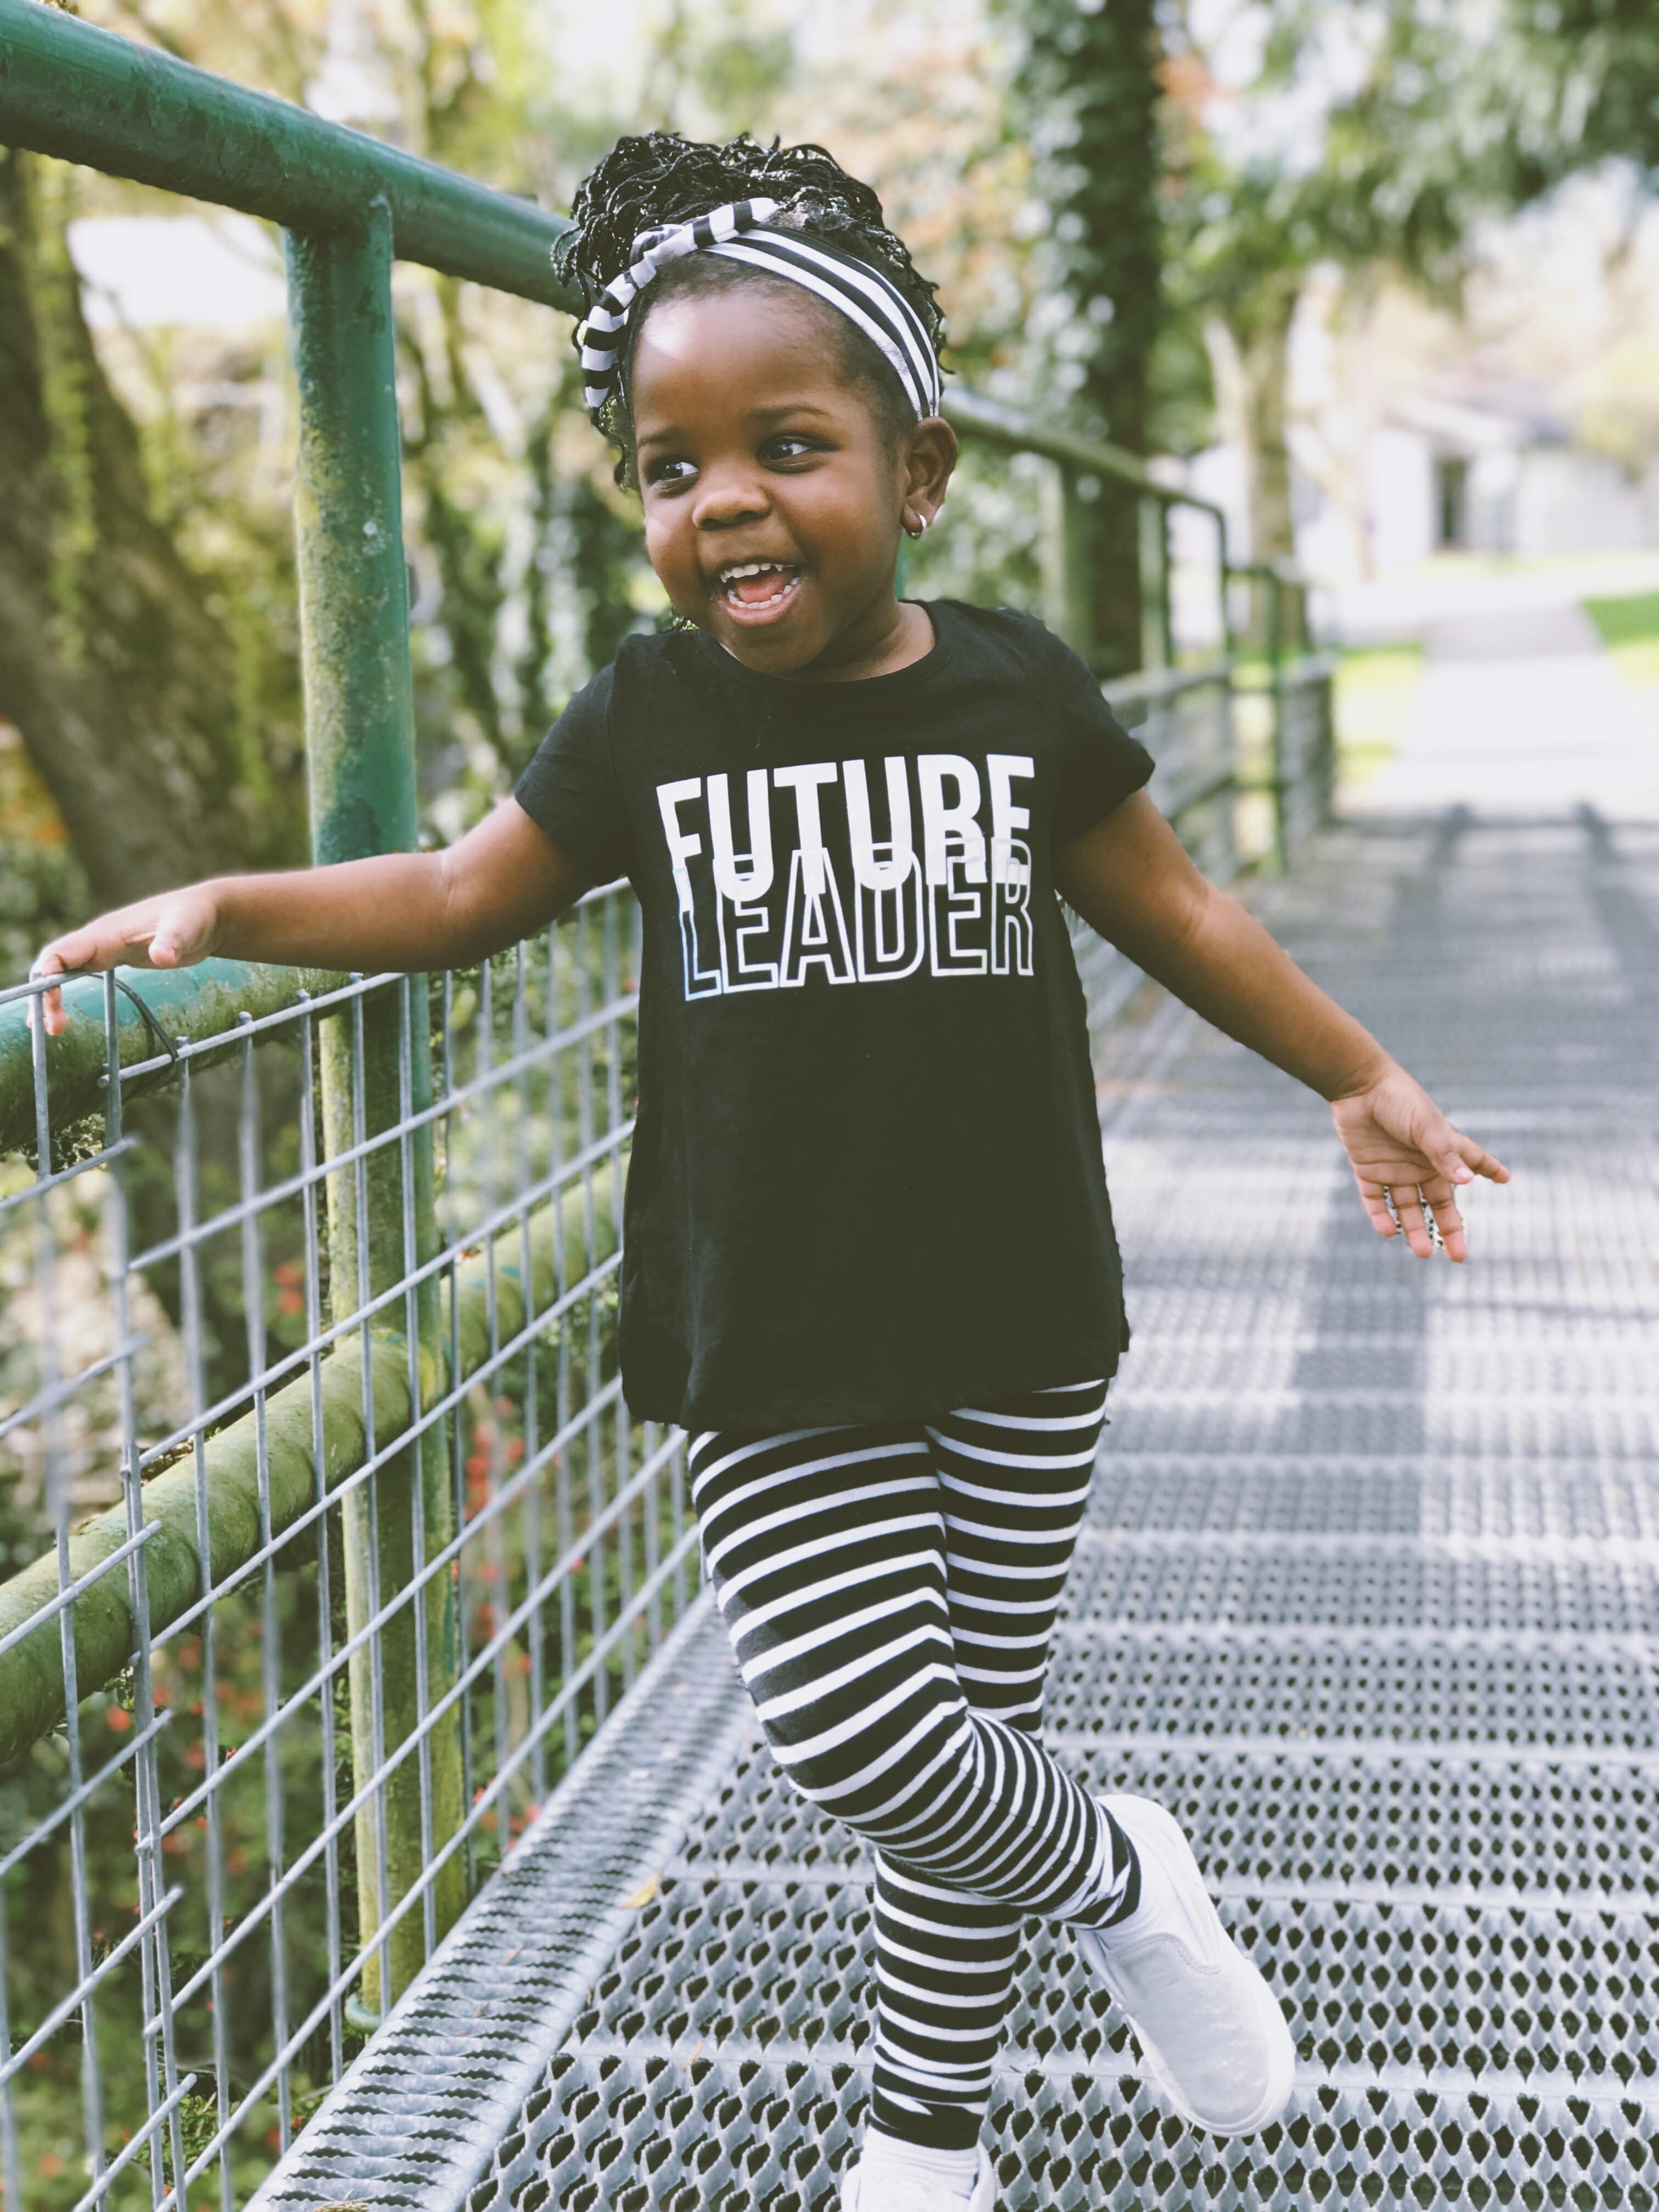 A little girl wearing a t-shirt saying "future leader"